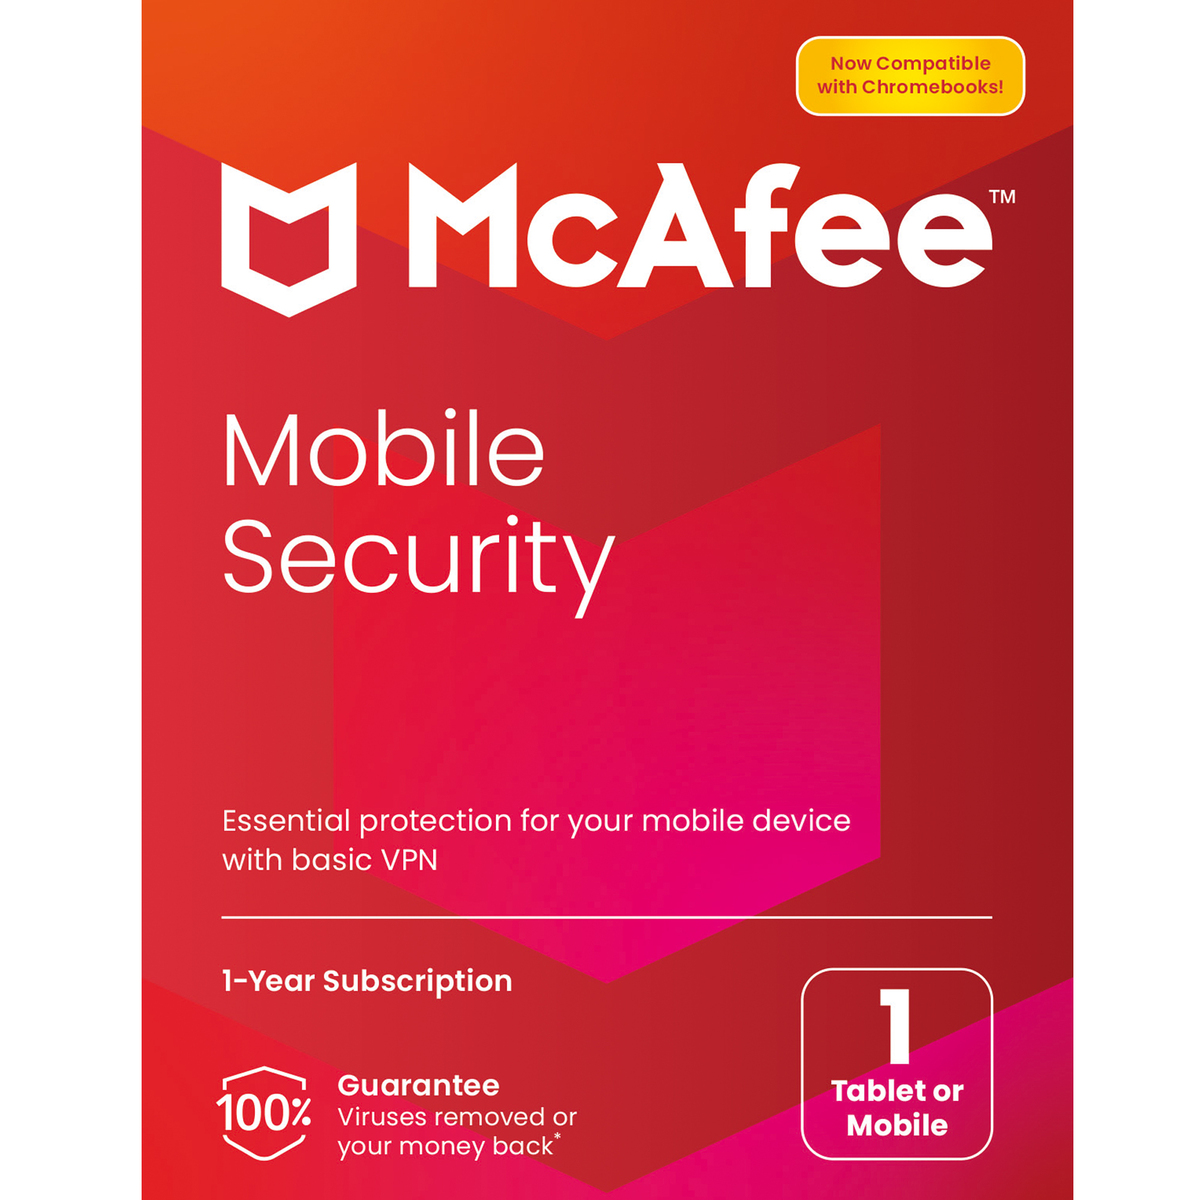 McAfee Mobile Security for Android, 1 Phone/Tablet, 1 User, 1 Year Subscription